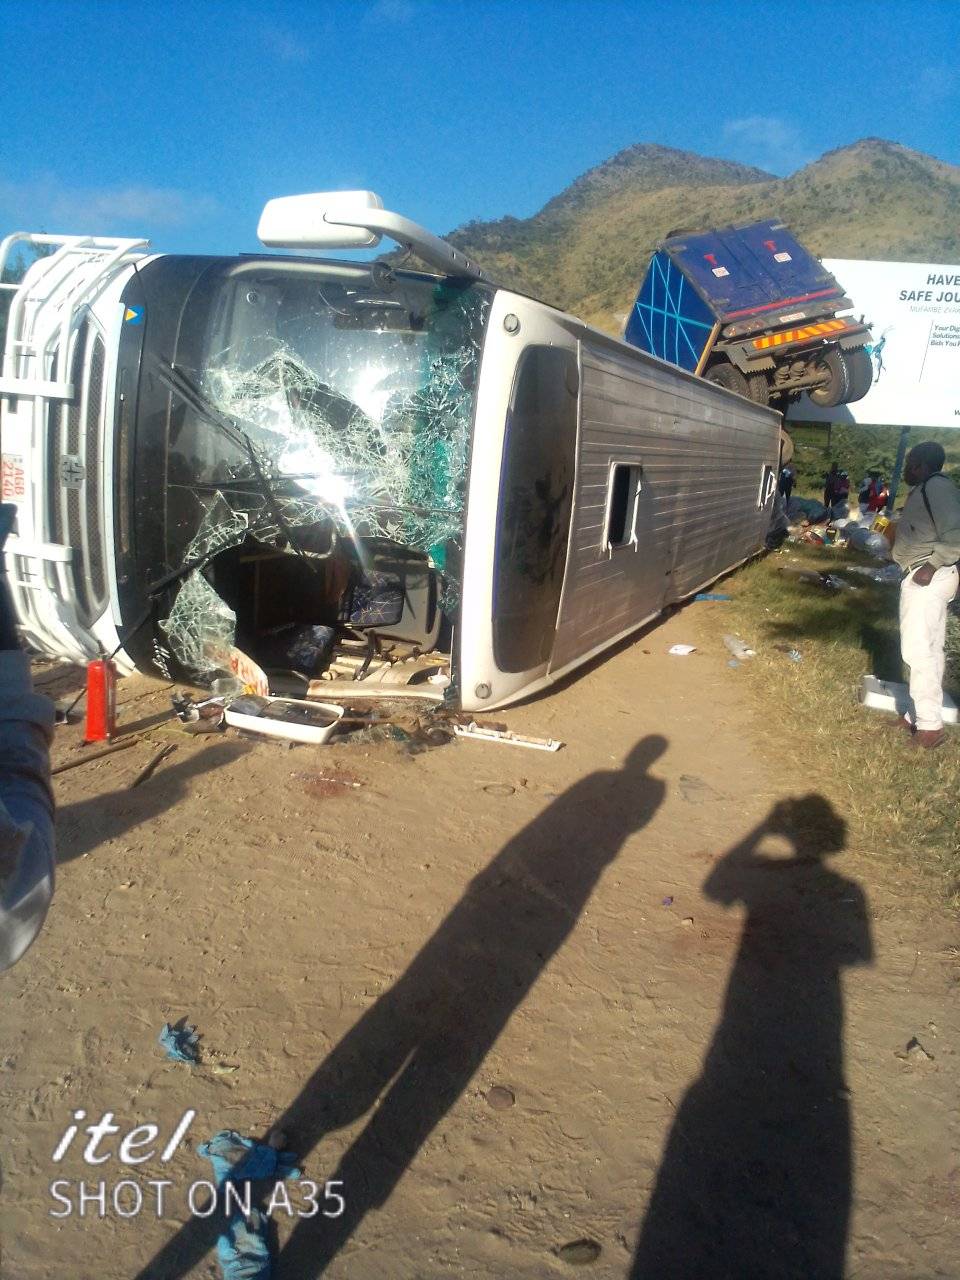 MUTARE: Zebra kiss traveling from Joburg involved in road accident